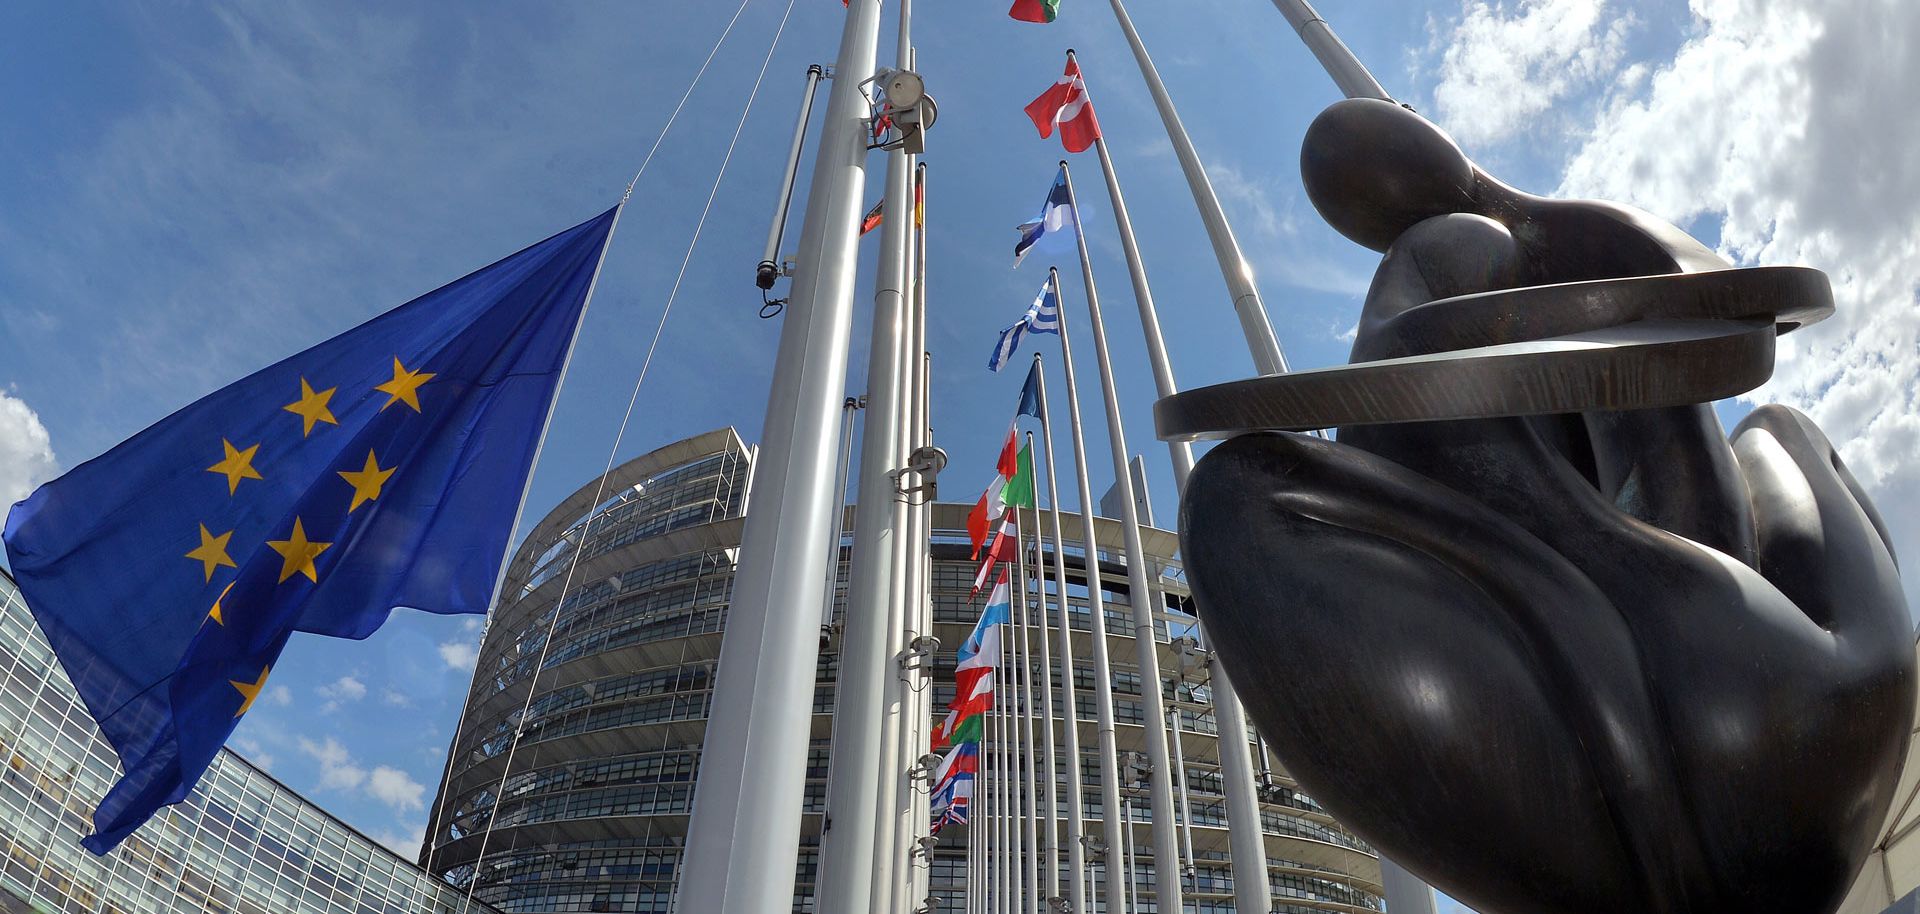 The European Union flag flying in front of the European Parliament in Strasbourg, France.